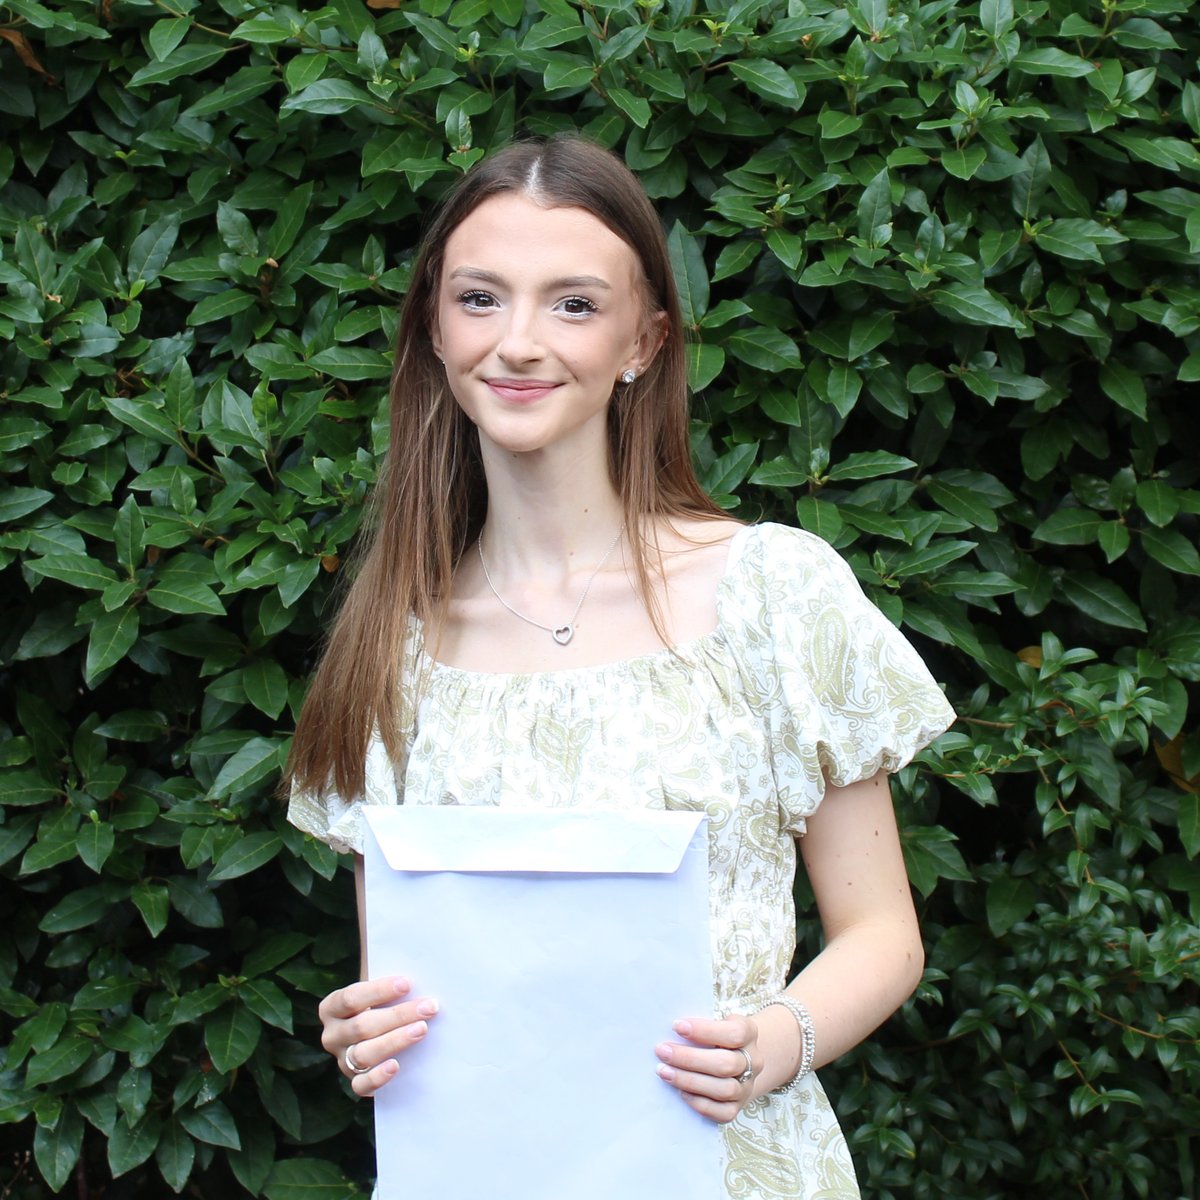 Lauren achieved A* A B and is now off to do a degree apprenticeship with Aitkens in Project Management. We're sure she will be very successful in her apprenticeship!